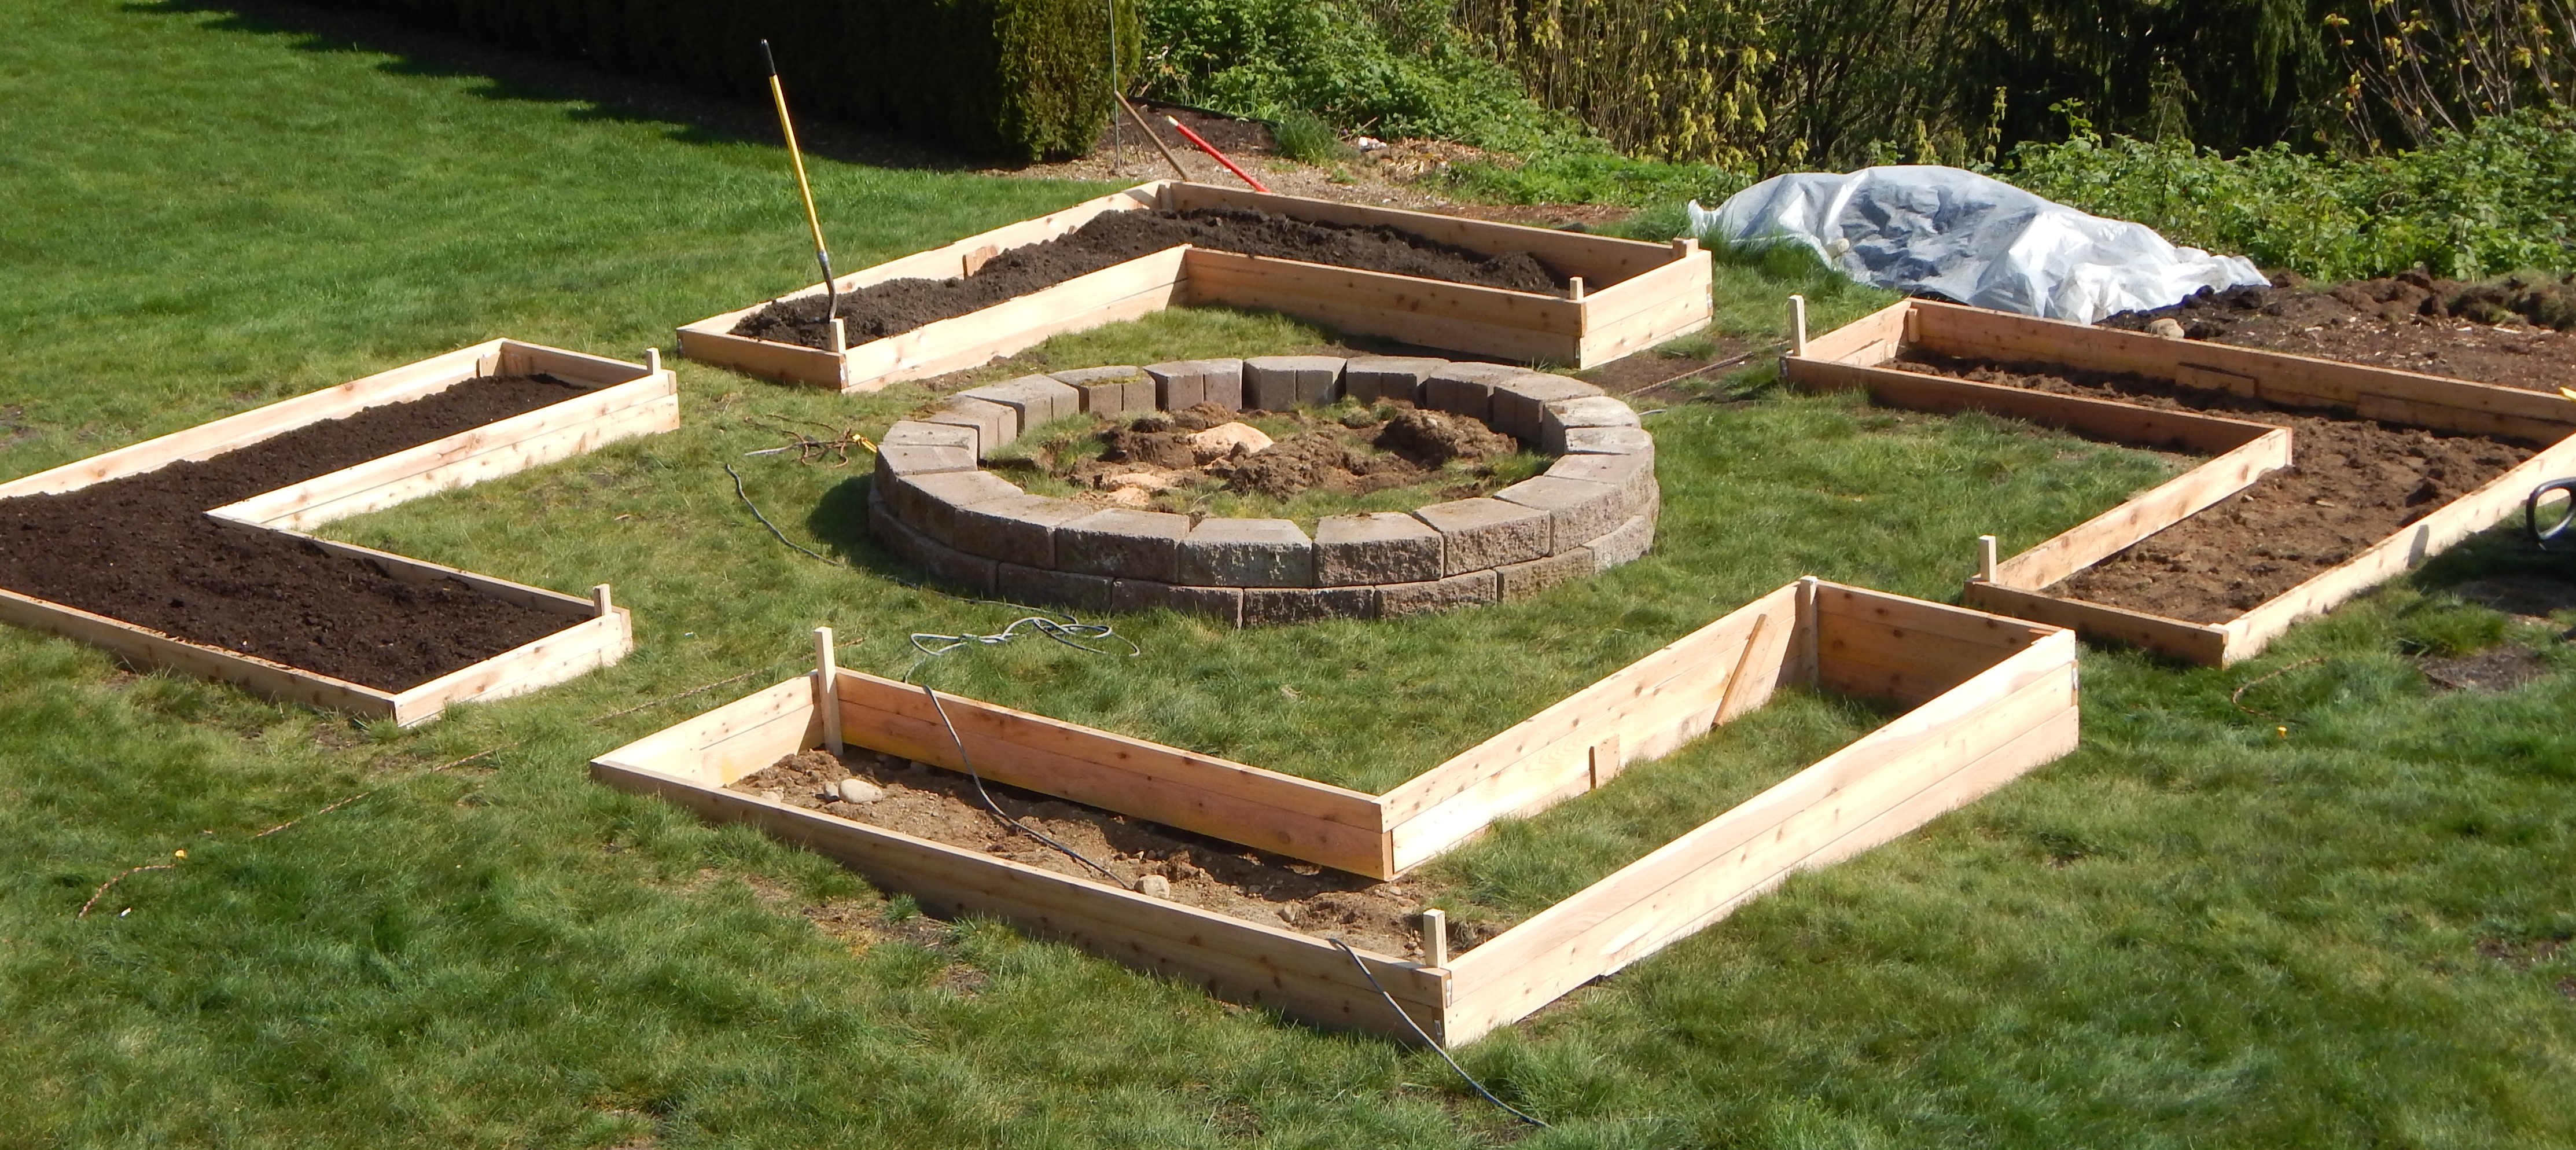 How To Build A Mini Raised Garden Beds